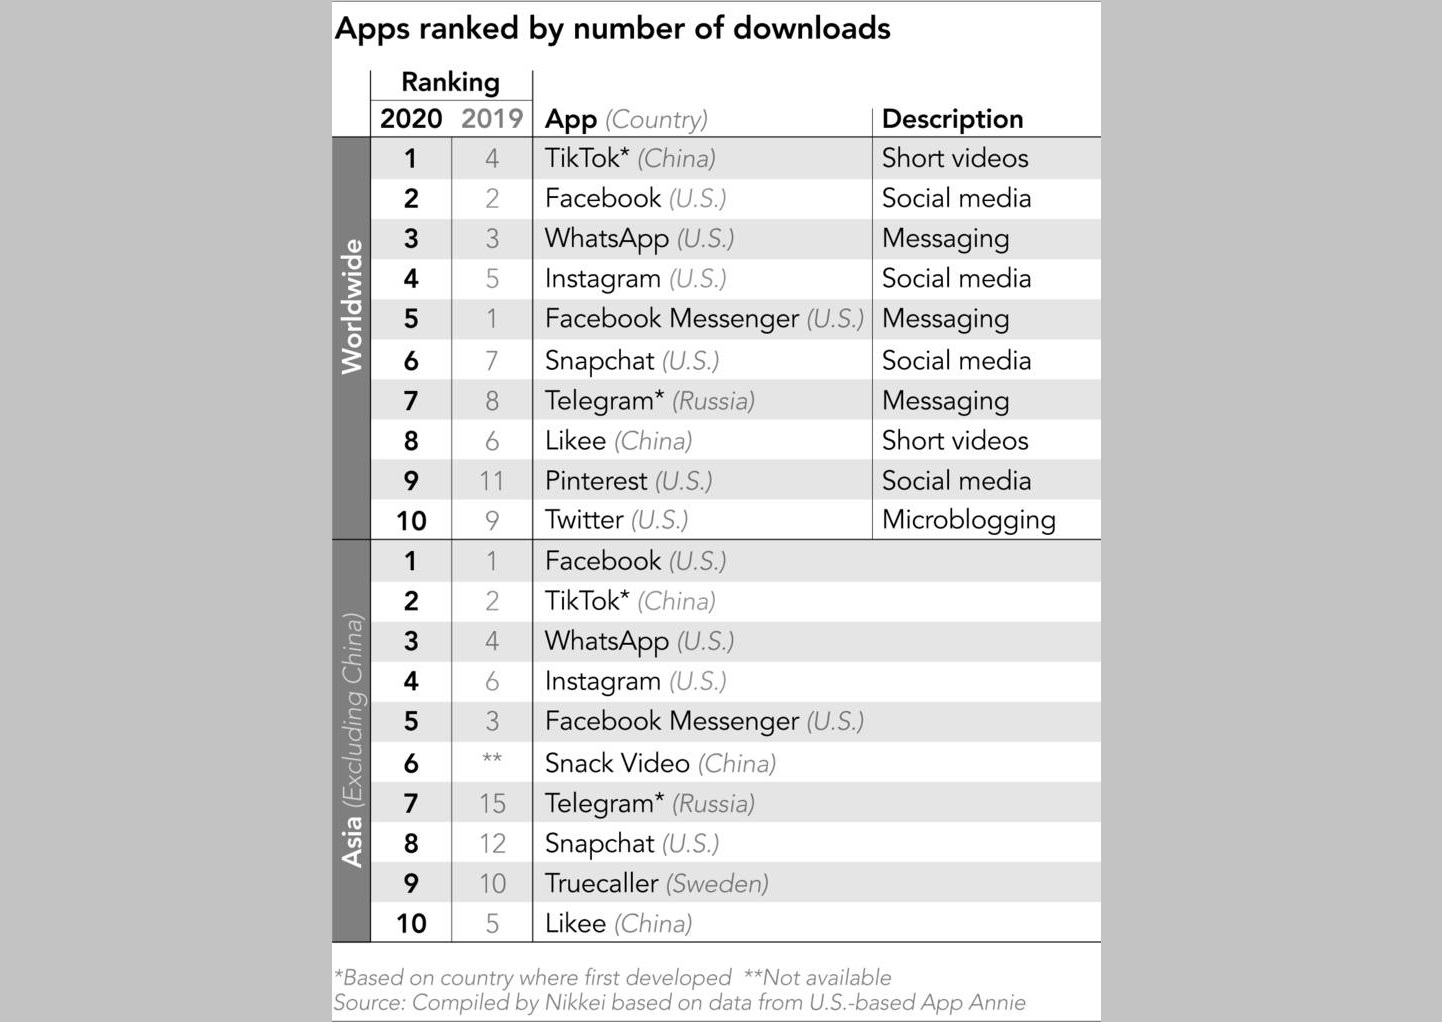 01-apps-ranked-by-number-of-downloads-world-asia